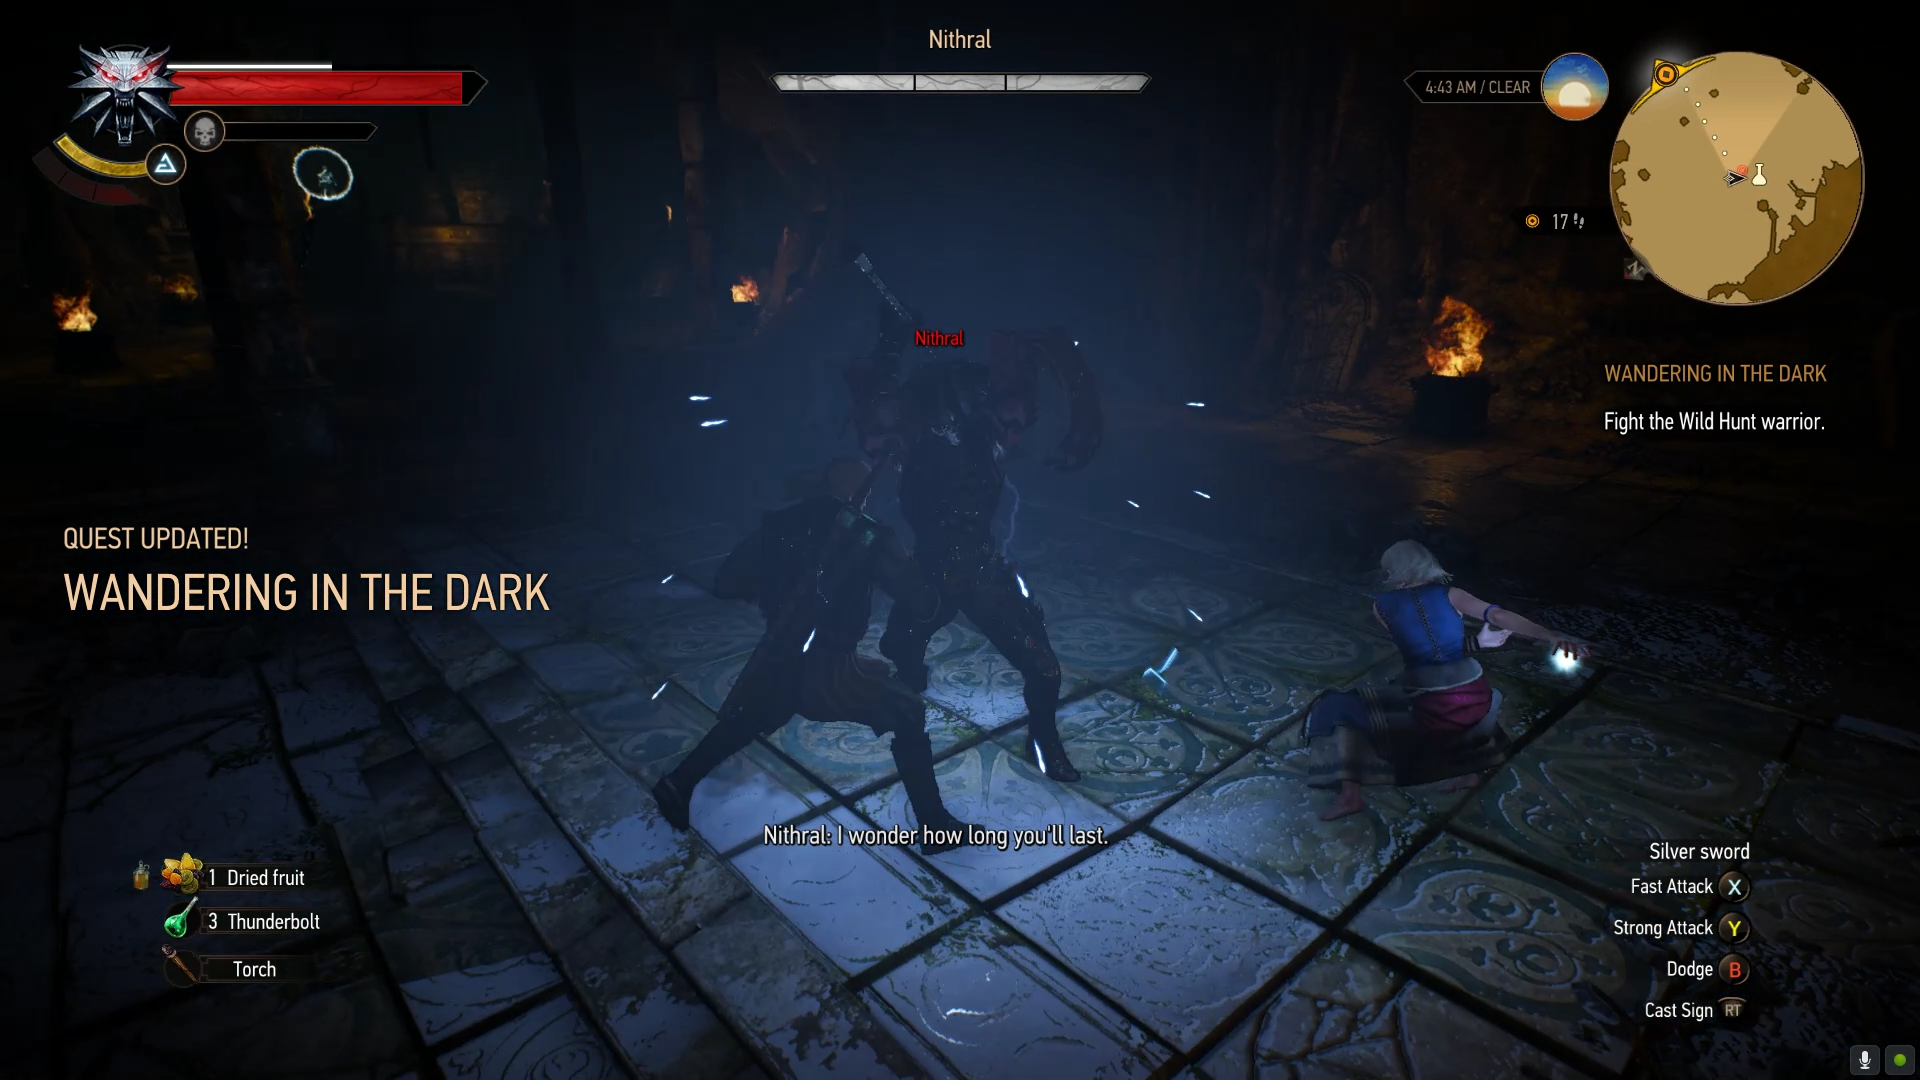 The Witcher 3 Strategy： Wandering in the Dark (Main Quest) – Velen